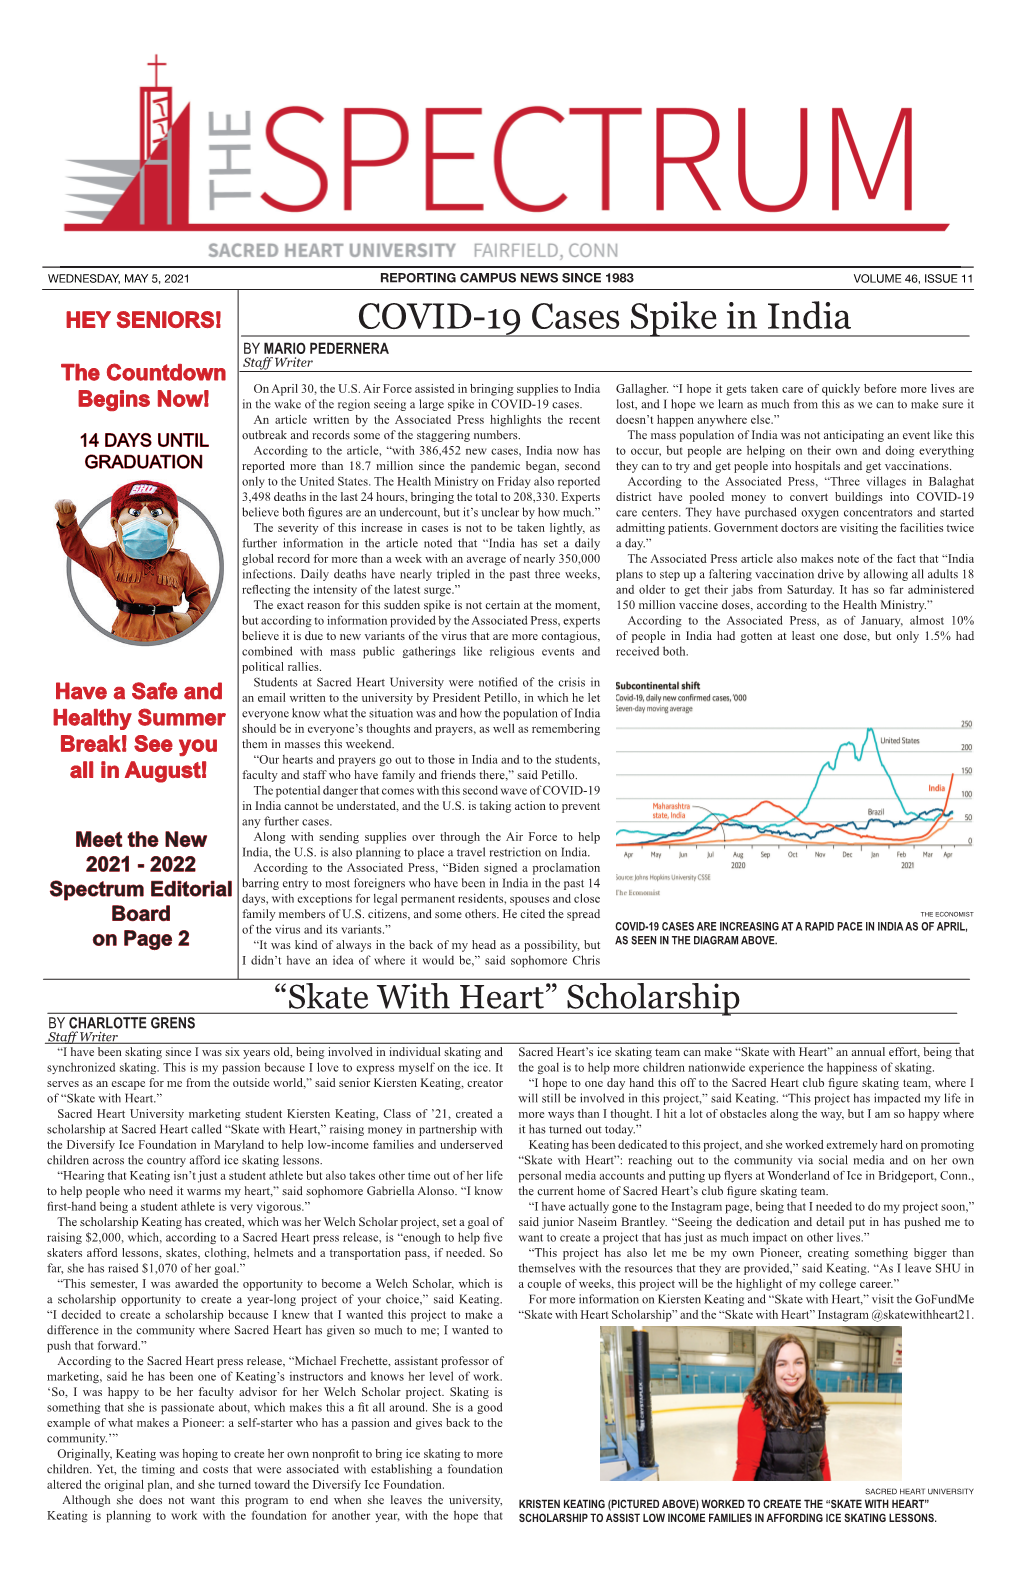 COVID-19 Cases Spike in India by MARIO PEDERNERA Staﬀ Writer the Countdown on April 30, the U.S